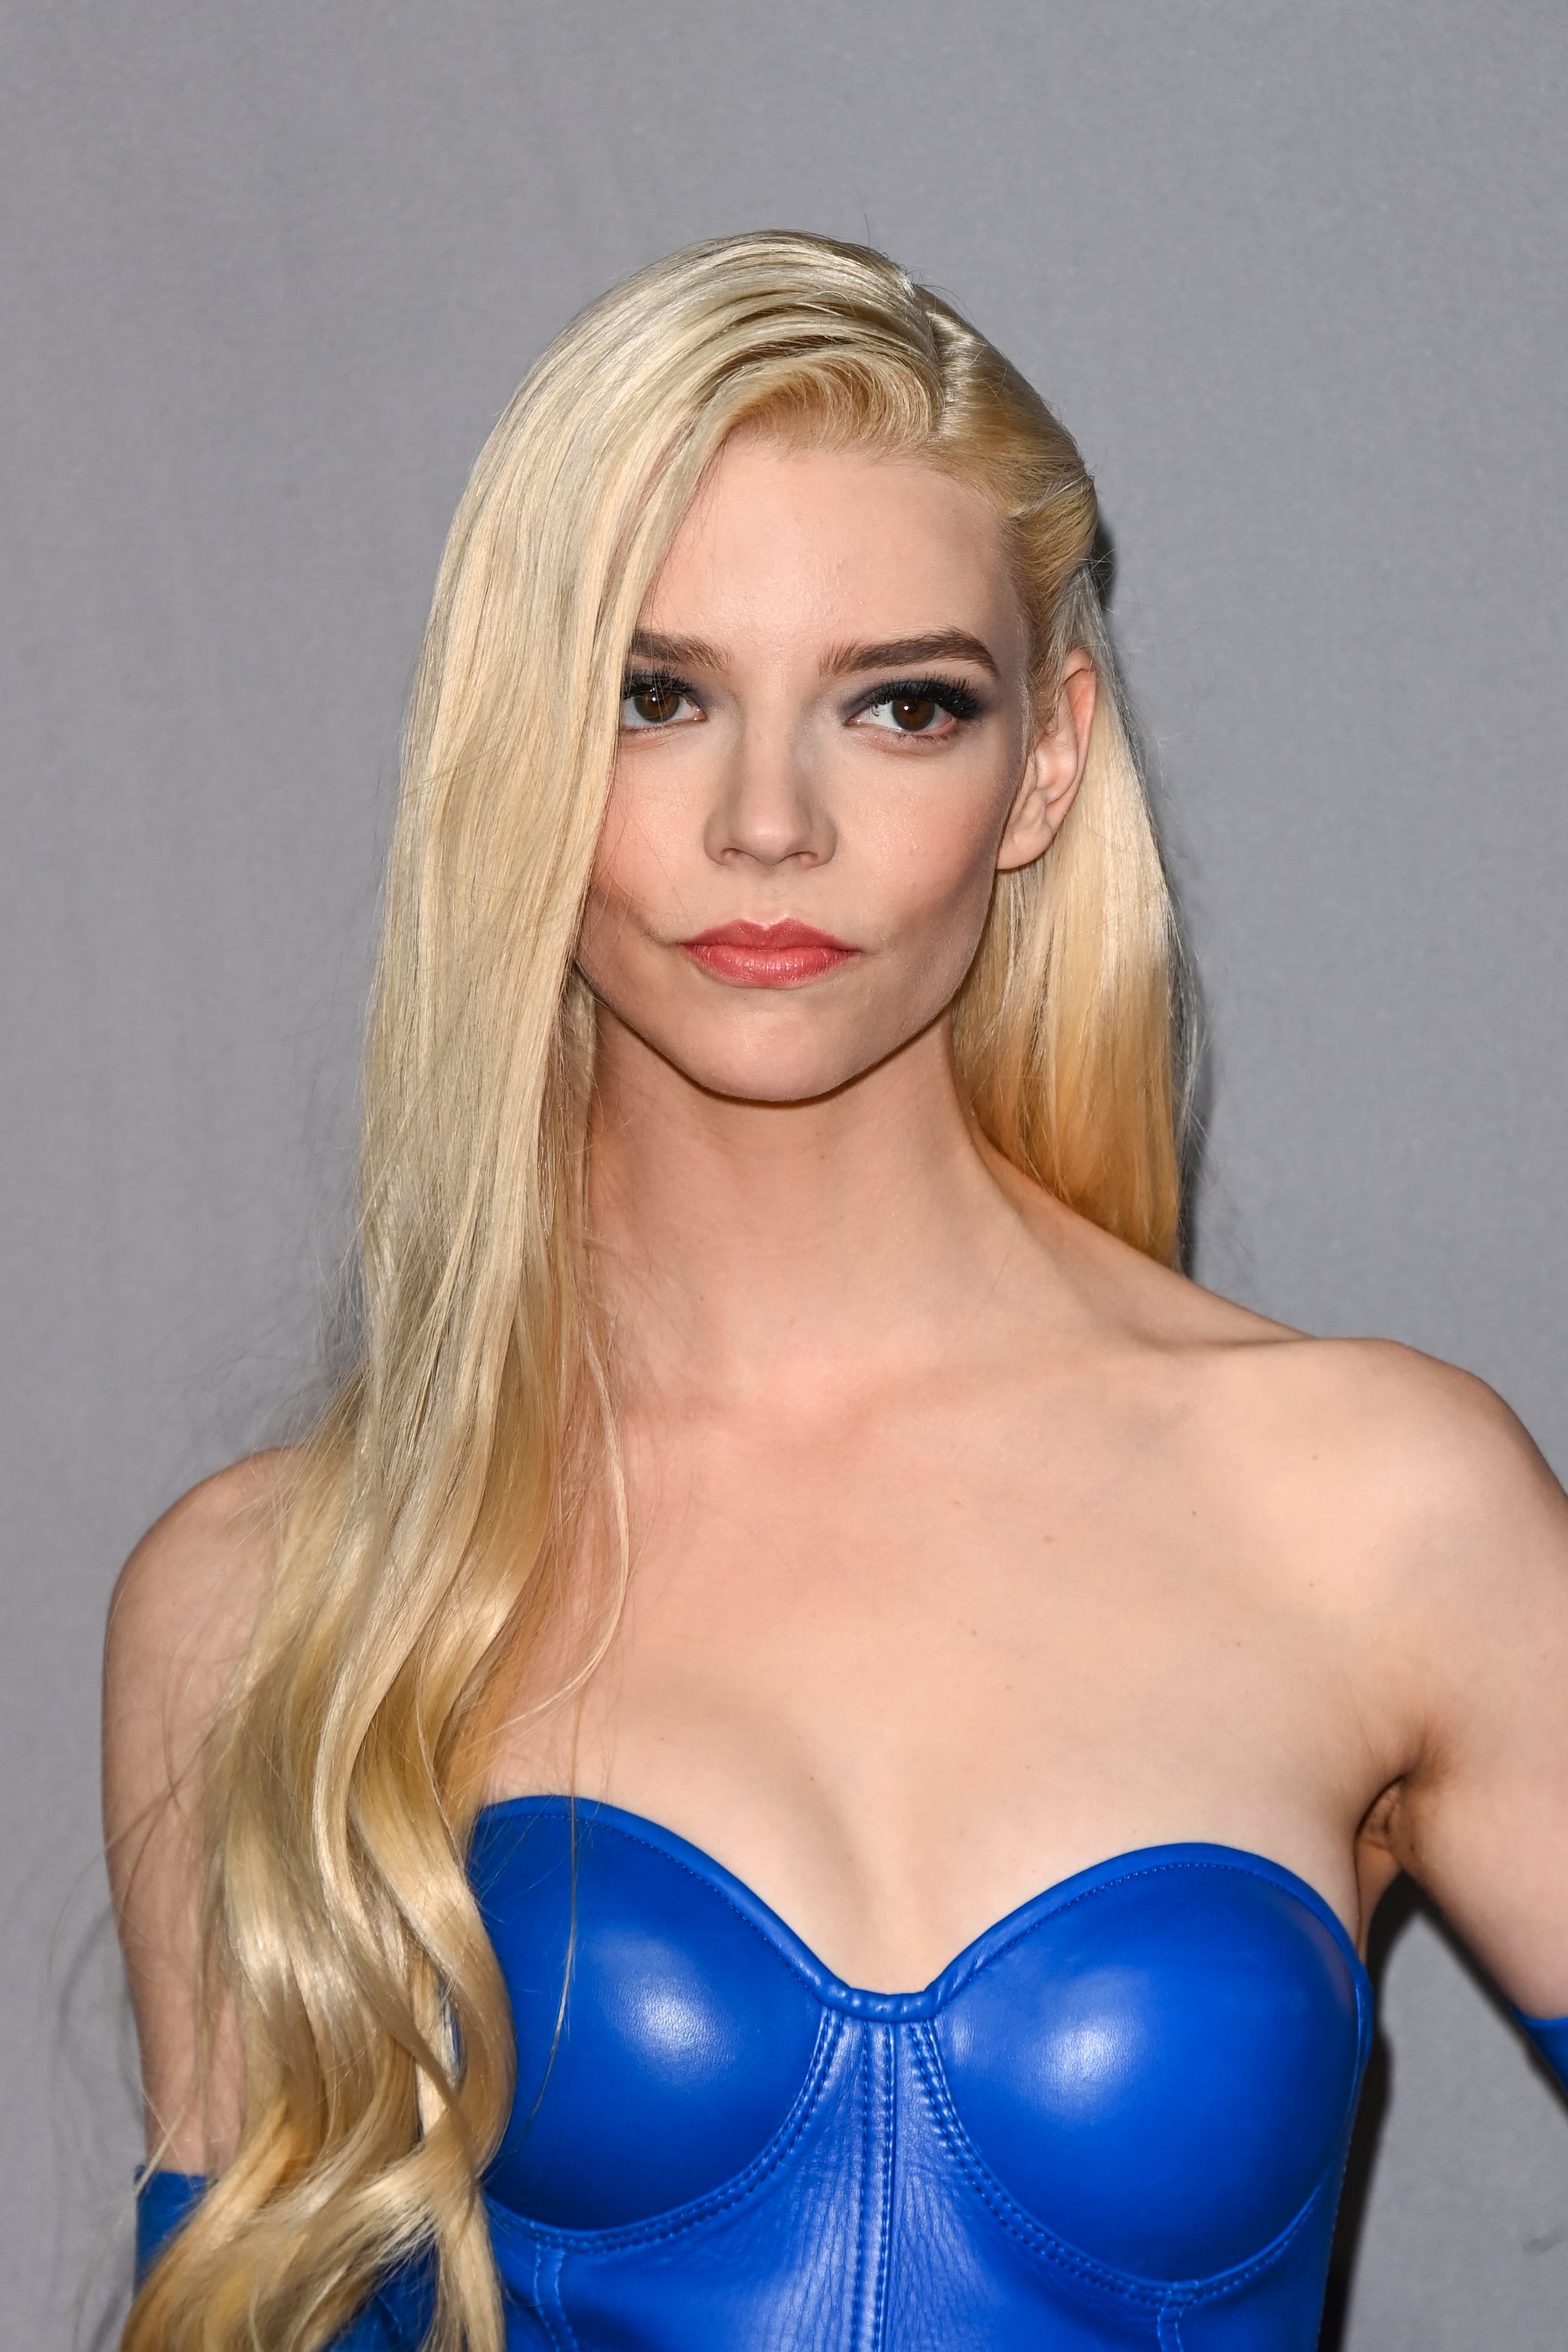 Anya Taylor Joy Goes Strapless In A Blue Latex Dress At The 'Menu' Premiere